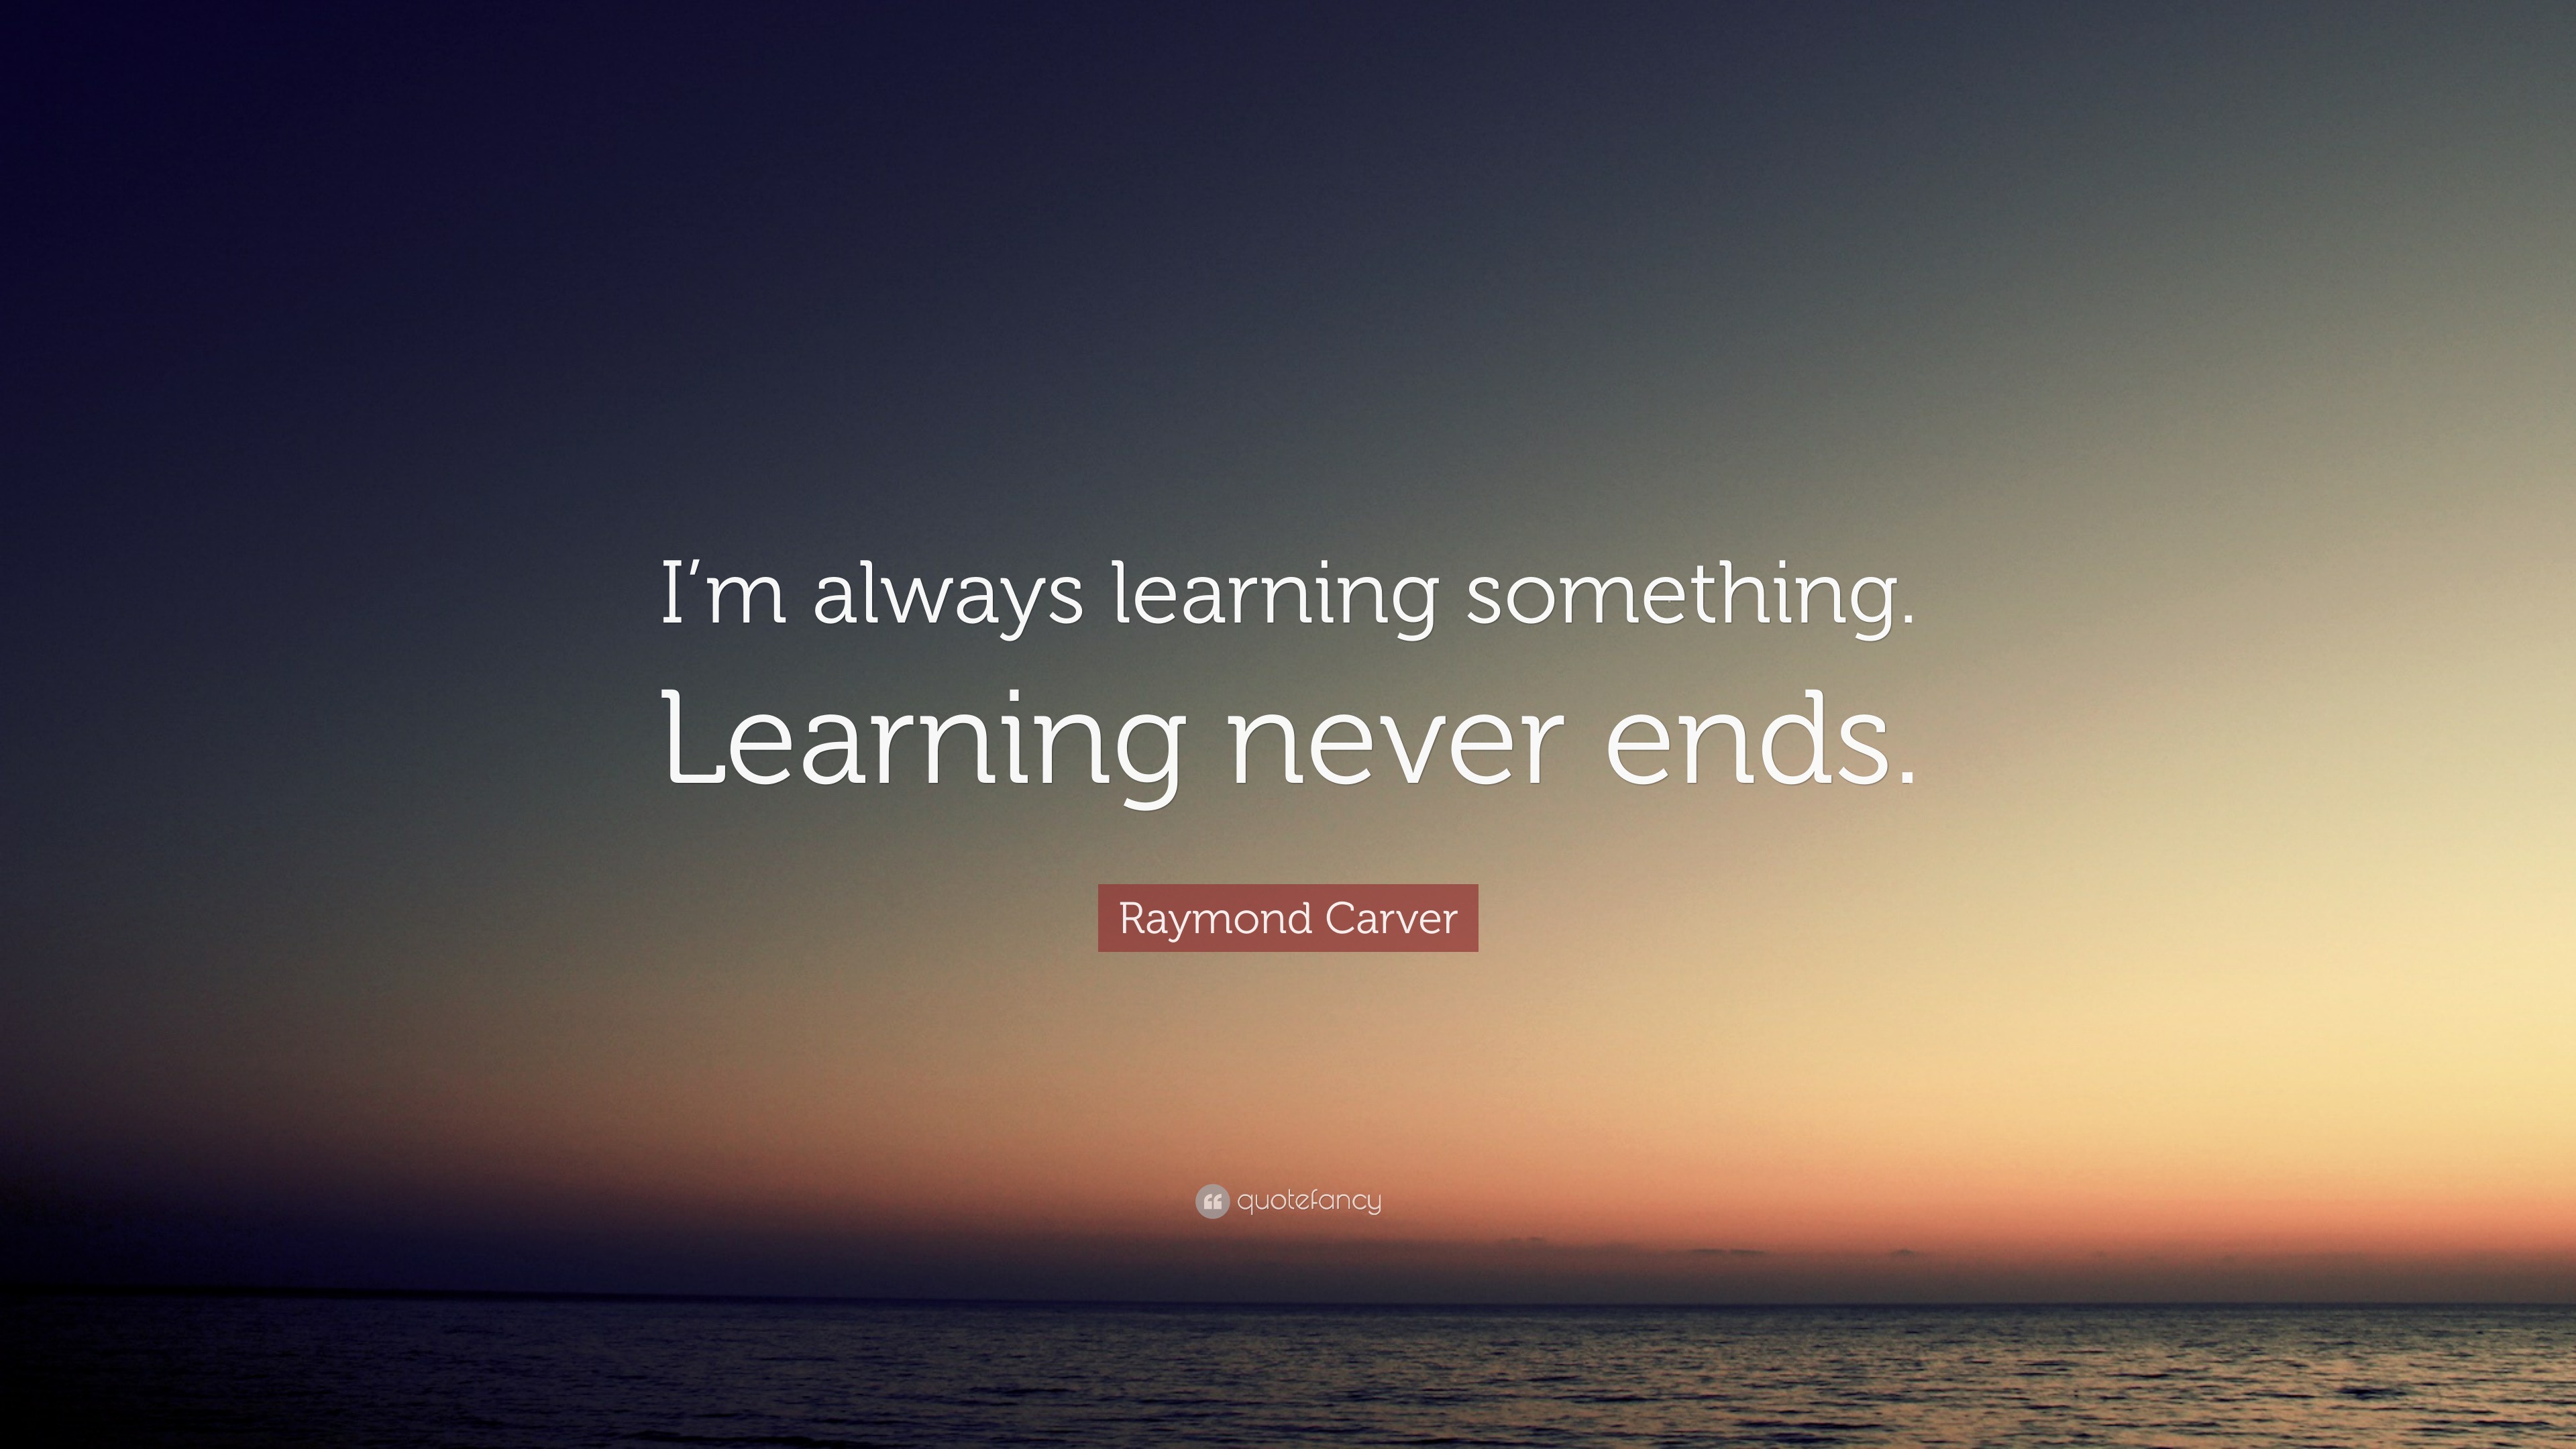 Raymond Carver Quote “im Always Learning Something Learning Never Ends”